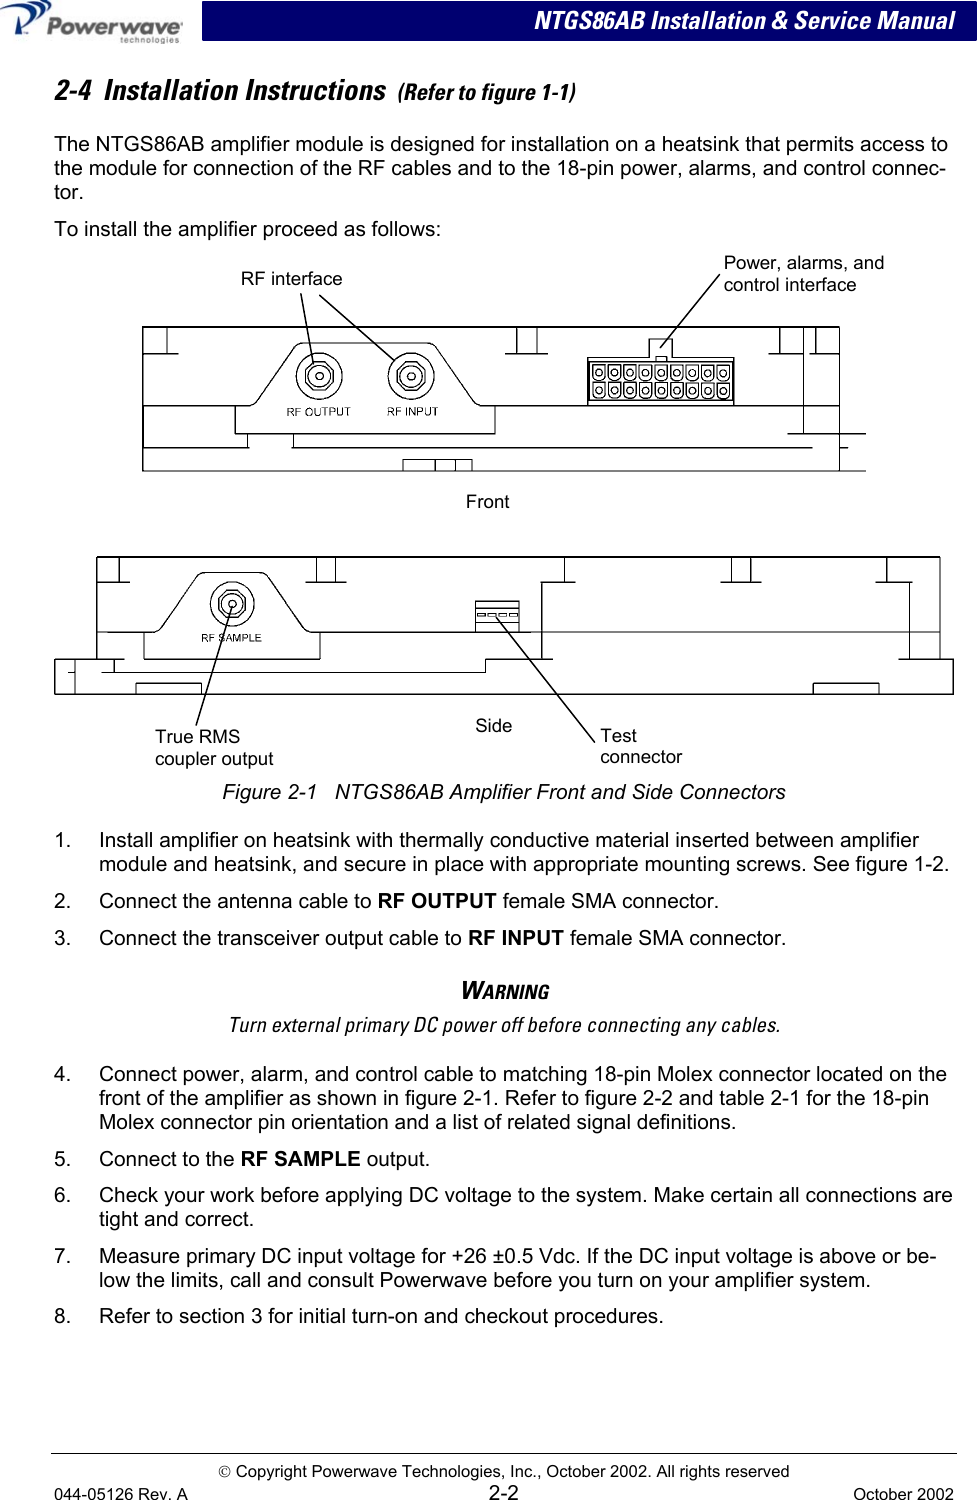  NTGS86AB Installation &amp; Service Manual 2-4  Installation Instructions  (Refer to figure 1-1) The NTGS86AB amplifier module is designed for installation on a heatsink that permits access to the module for connection of the RF cables and to the 18-pin power, alarms, and control connec-tor. To install the amplifier proceed as follows:    Power, alarms, and control interface RF interface  Front     Figure 2-1   NTGS86AB Amplifier Front and Side Connectors True RMS coupler output Side Test  connector 1.  Install amplifier on heatsink with thermally conductive material inserted between amplifier module and heatsink, and secure in place with appropriate mounting screws. See figure 1-2. 2.  Connect the antenna cable to RF OUTPUT female SMA connector. 3.  Connect the transceiver output cable to RF INPUT female SMA connector. WARNING Turn external primary DC power off before connecting any cables. 4.  Connect power, alarm, and control cable to matching 18-pin Molex connector located on the front of the amplifier as shown in figure 2-1. Refer to figure 2-2 and table 2-1 for the 18-pin Molex connector pin orientation and a list of related signal definitions. 5.  Connect to the RF SAMPLE output. 6.  Check your work before applying DC voltage to the system. Make certain all connections are tight and correct. 7.  Measure primary DC input voltage for +26 ±0.5 Vdc. If the DC input voltage is above or be-low the limits, call and consult Powerwave before you turn on your amplifier system. 8.  Refer to section 3 for initial turn-on and checkout procedures.  Copyright Powerwave Technologies, Inc., October 2002. All rights reserved 044-05126 Rev. A 2-2  October 2002 